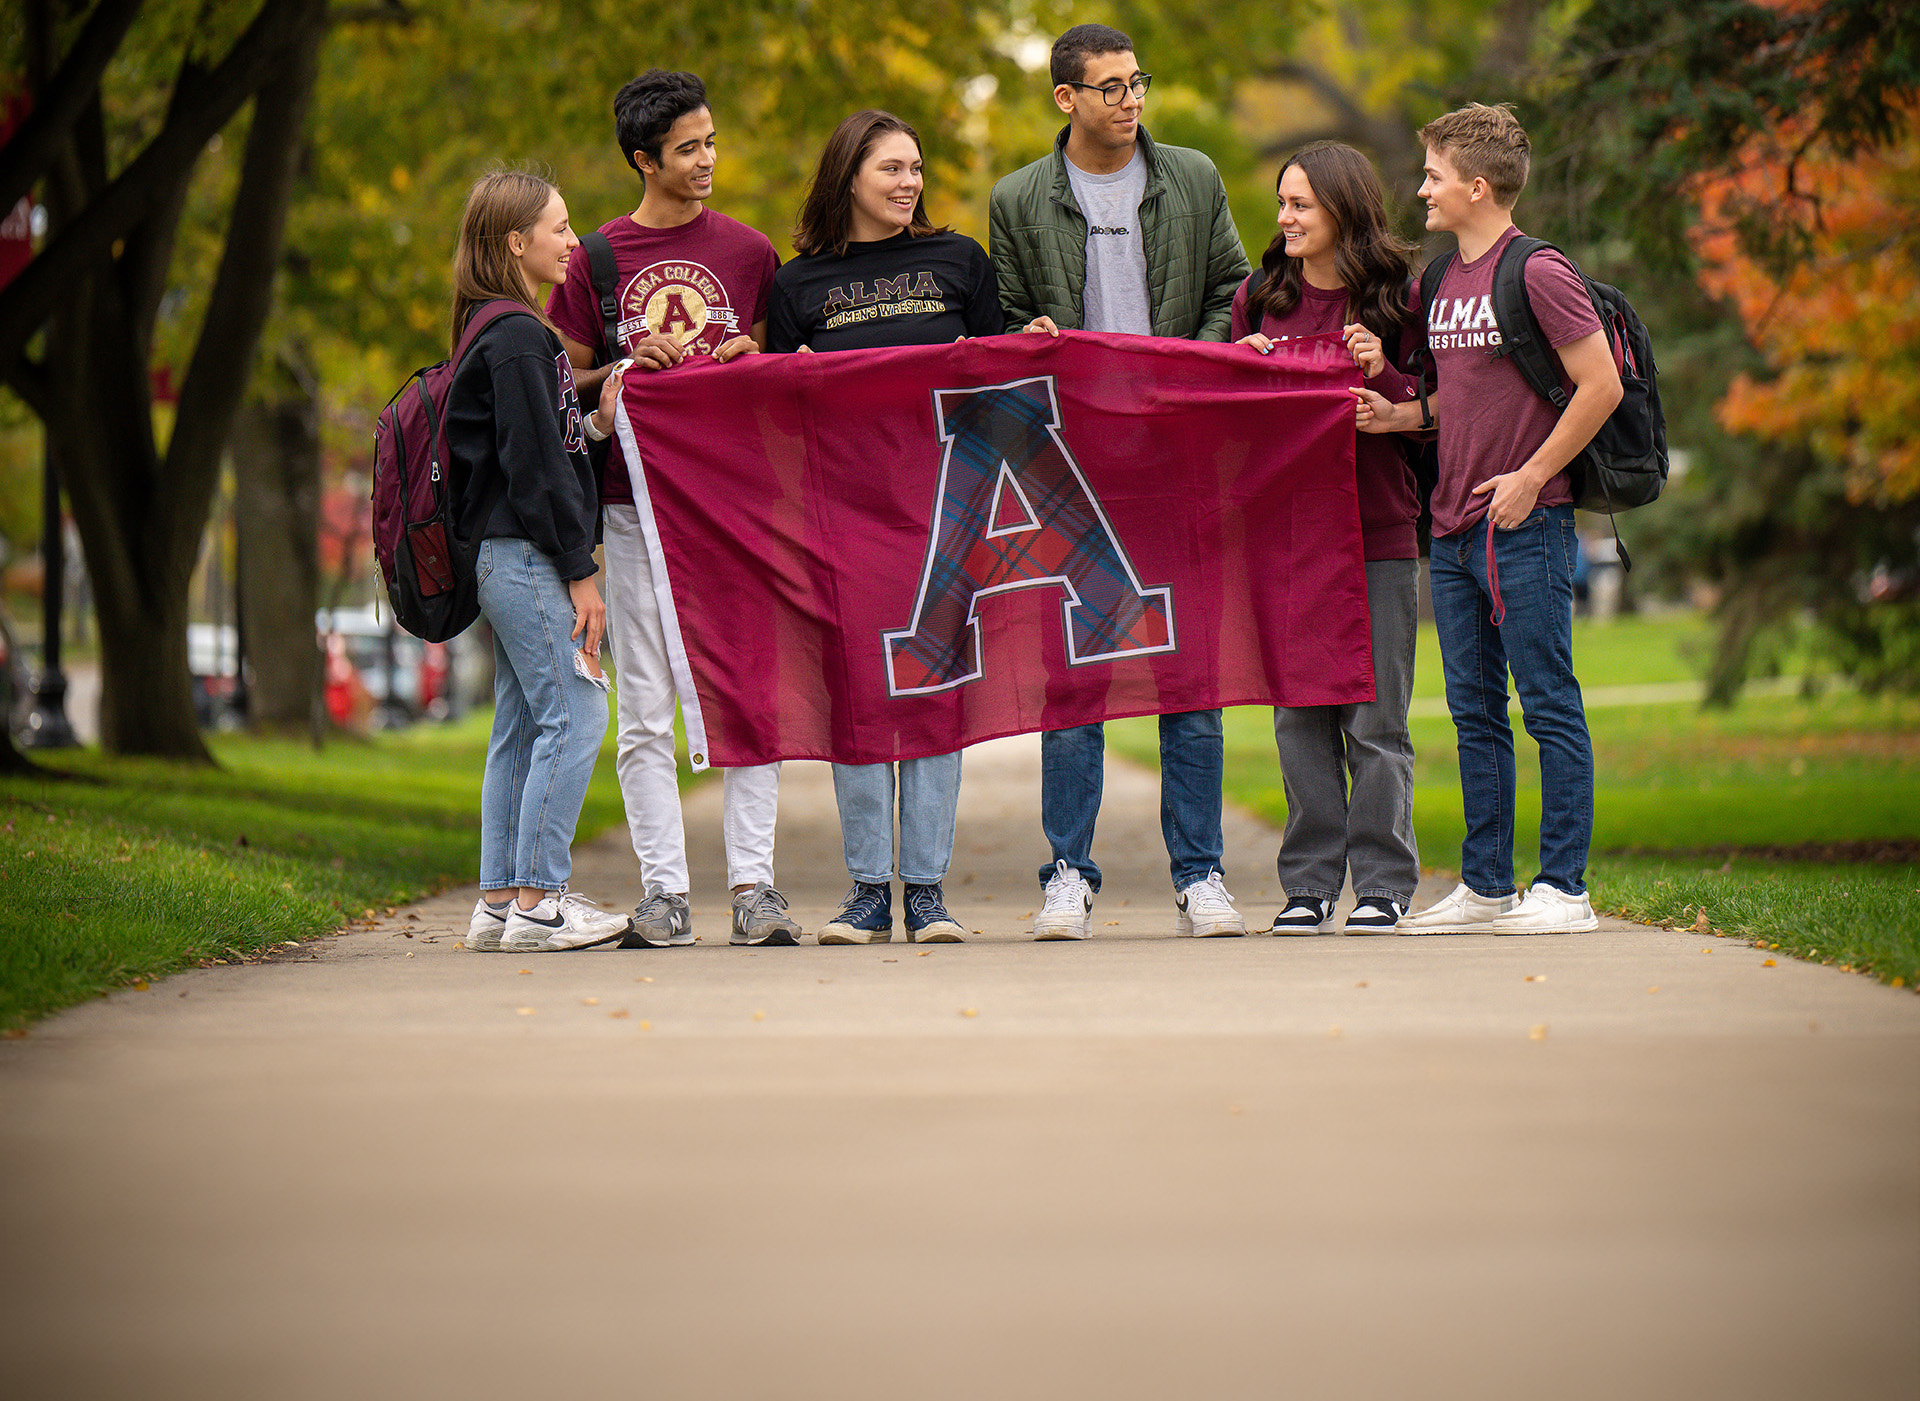 Students with Alma flag standing on the sidewalk and talking.